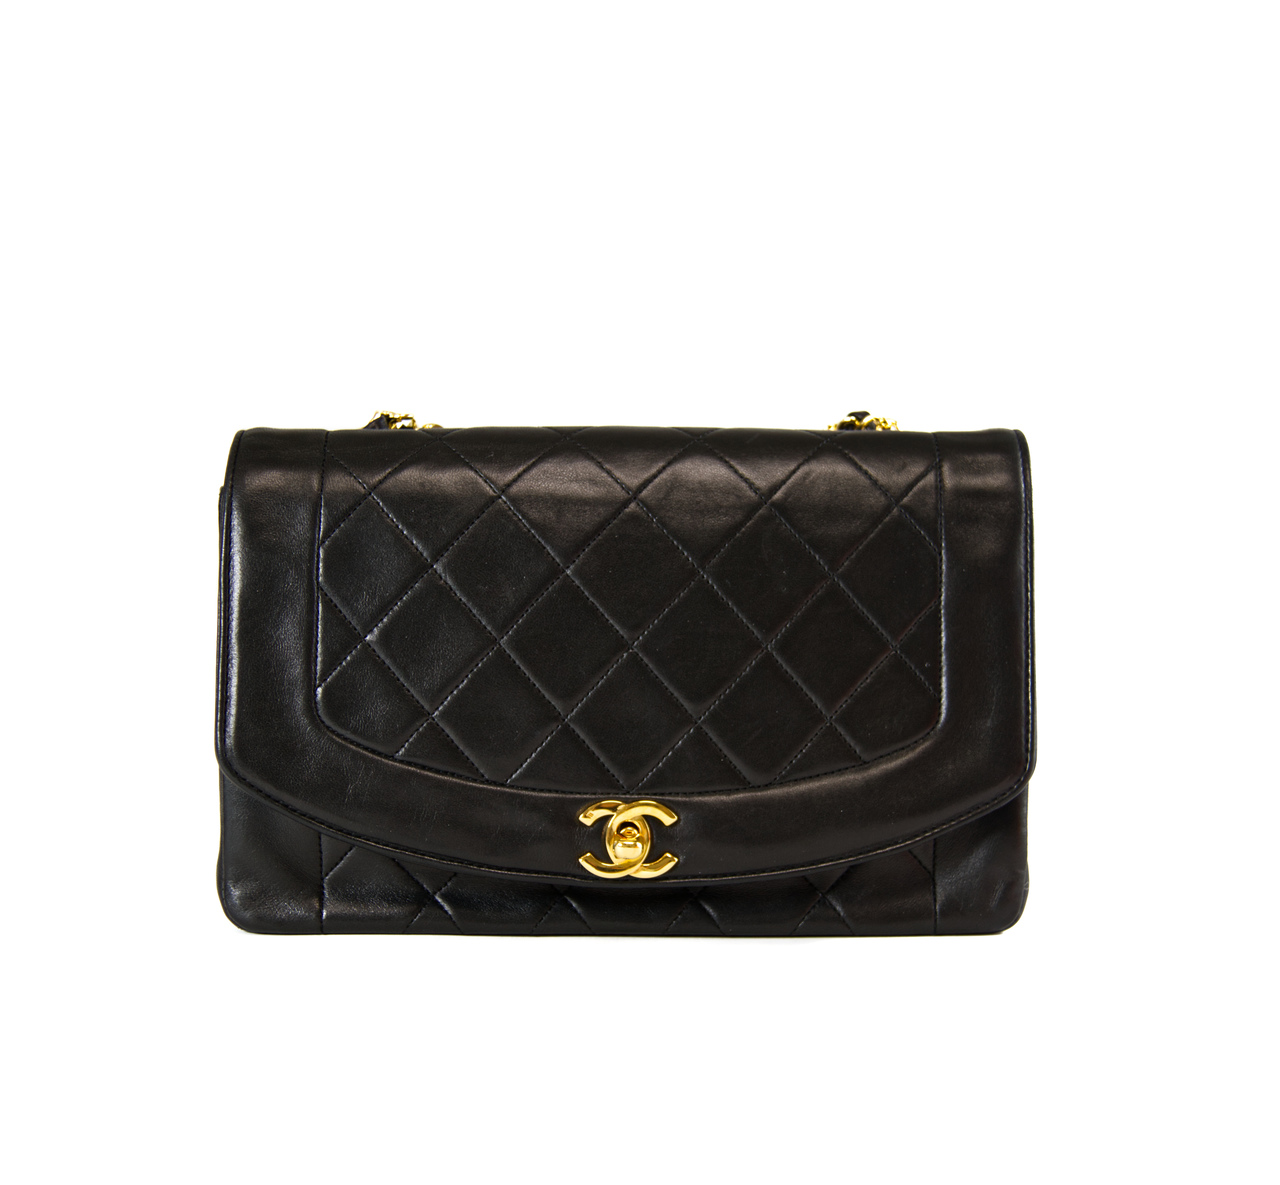 Chanel Diana single flap front